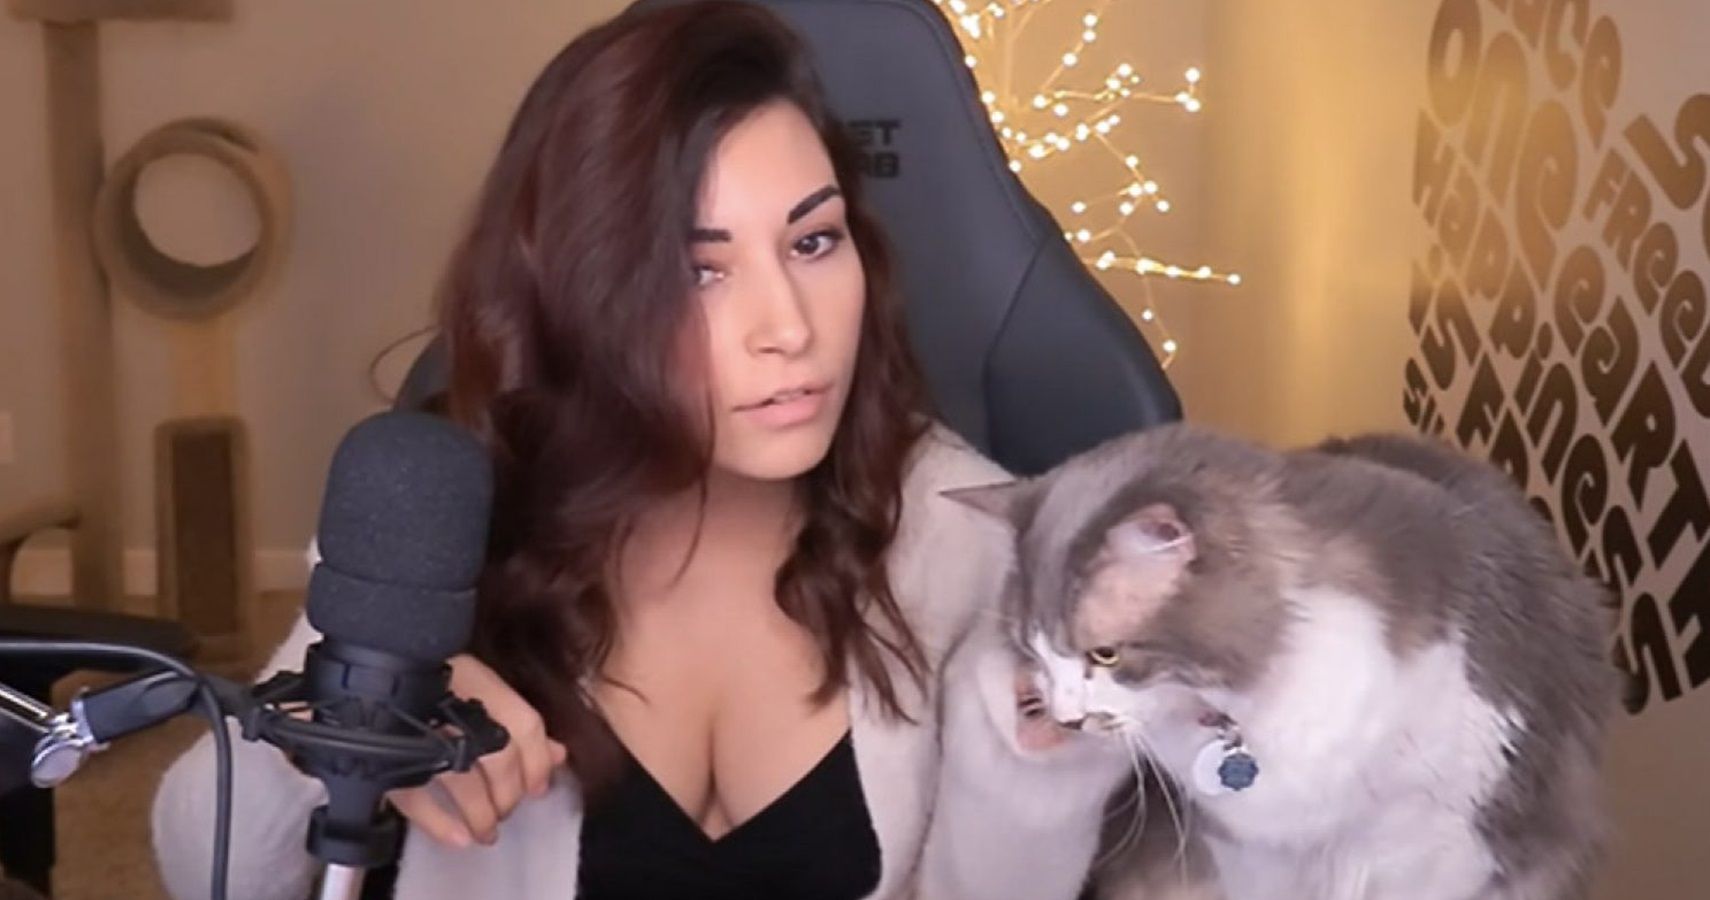 What is alinity snapchat